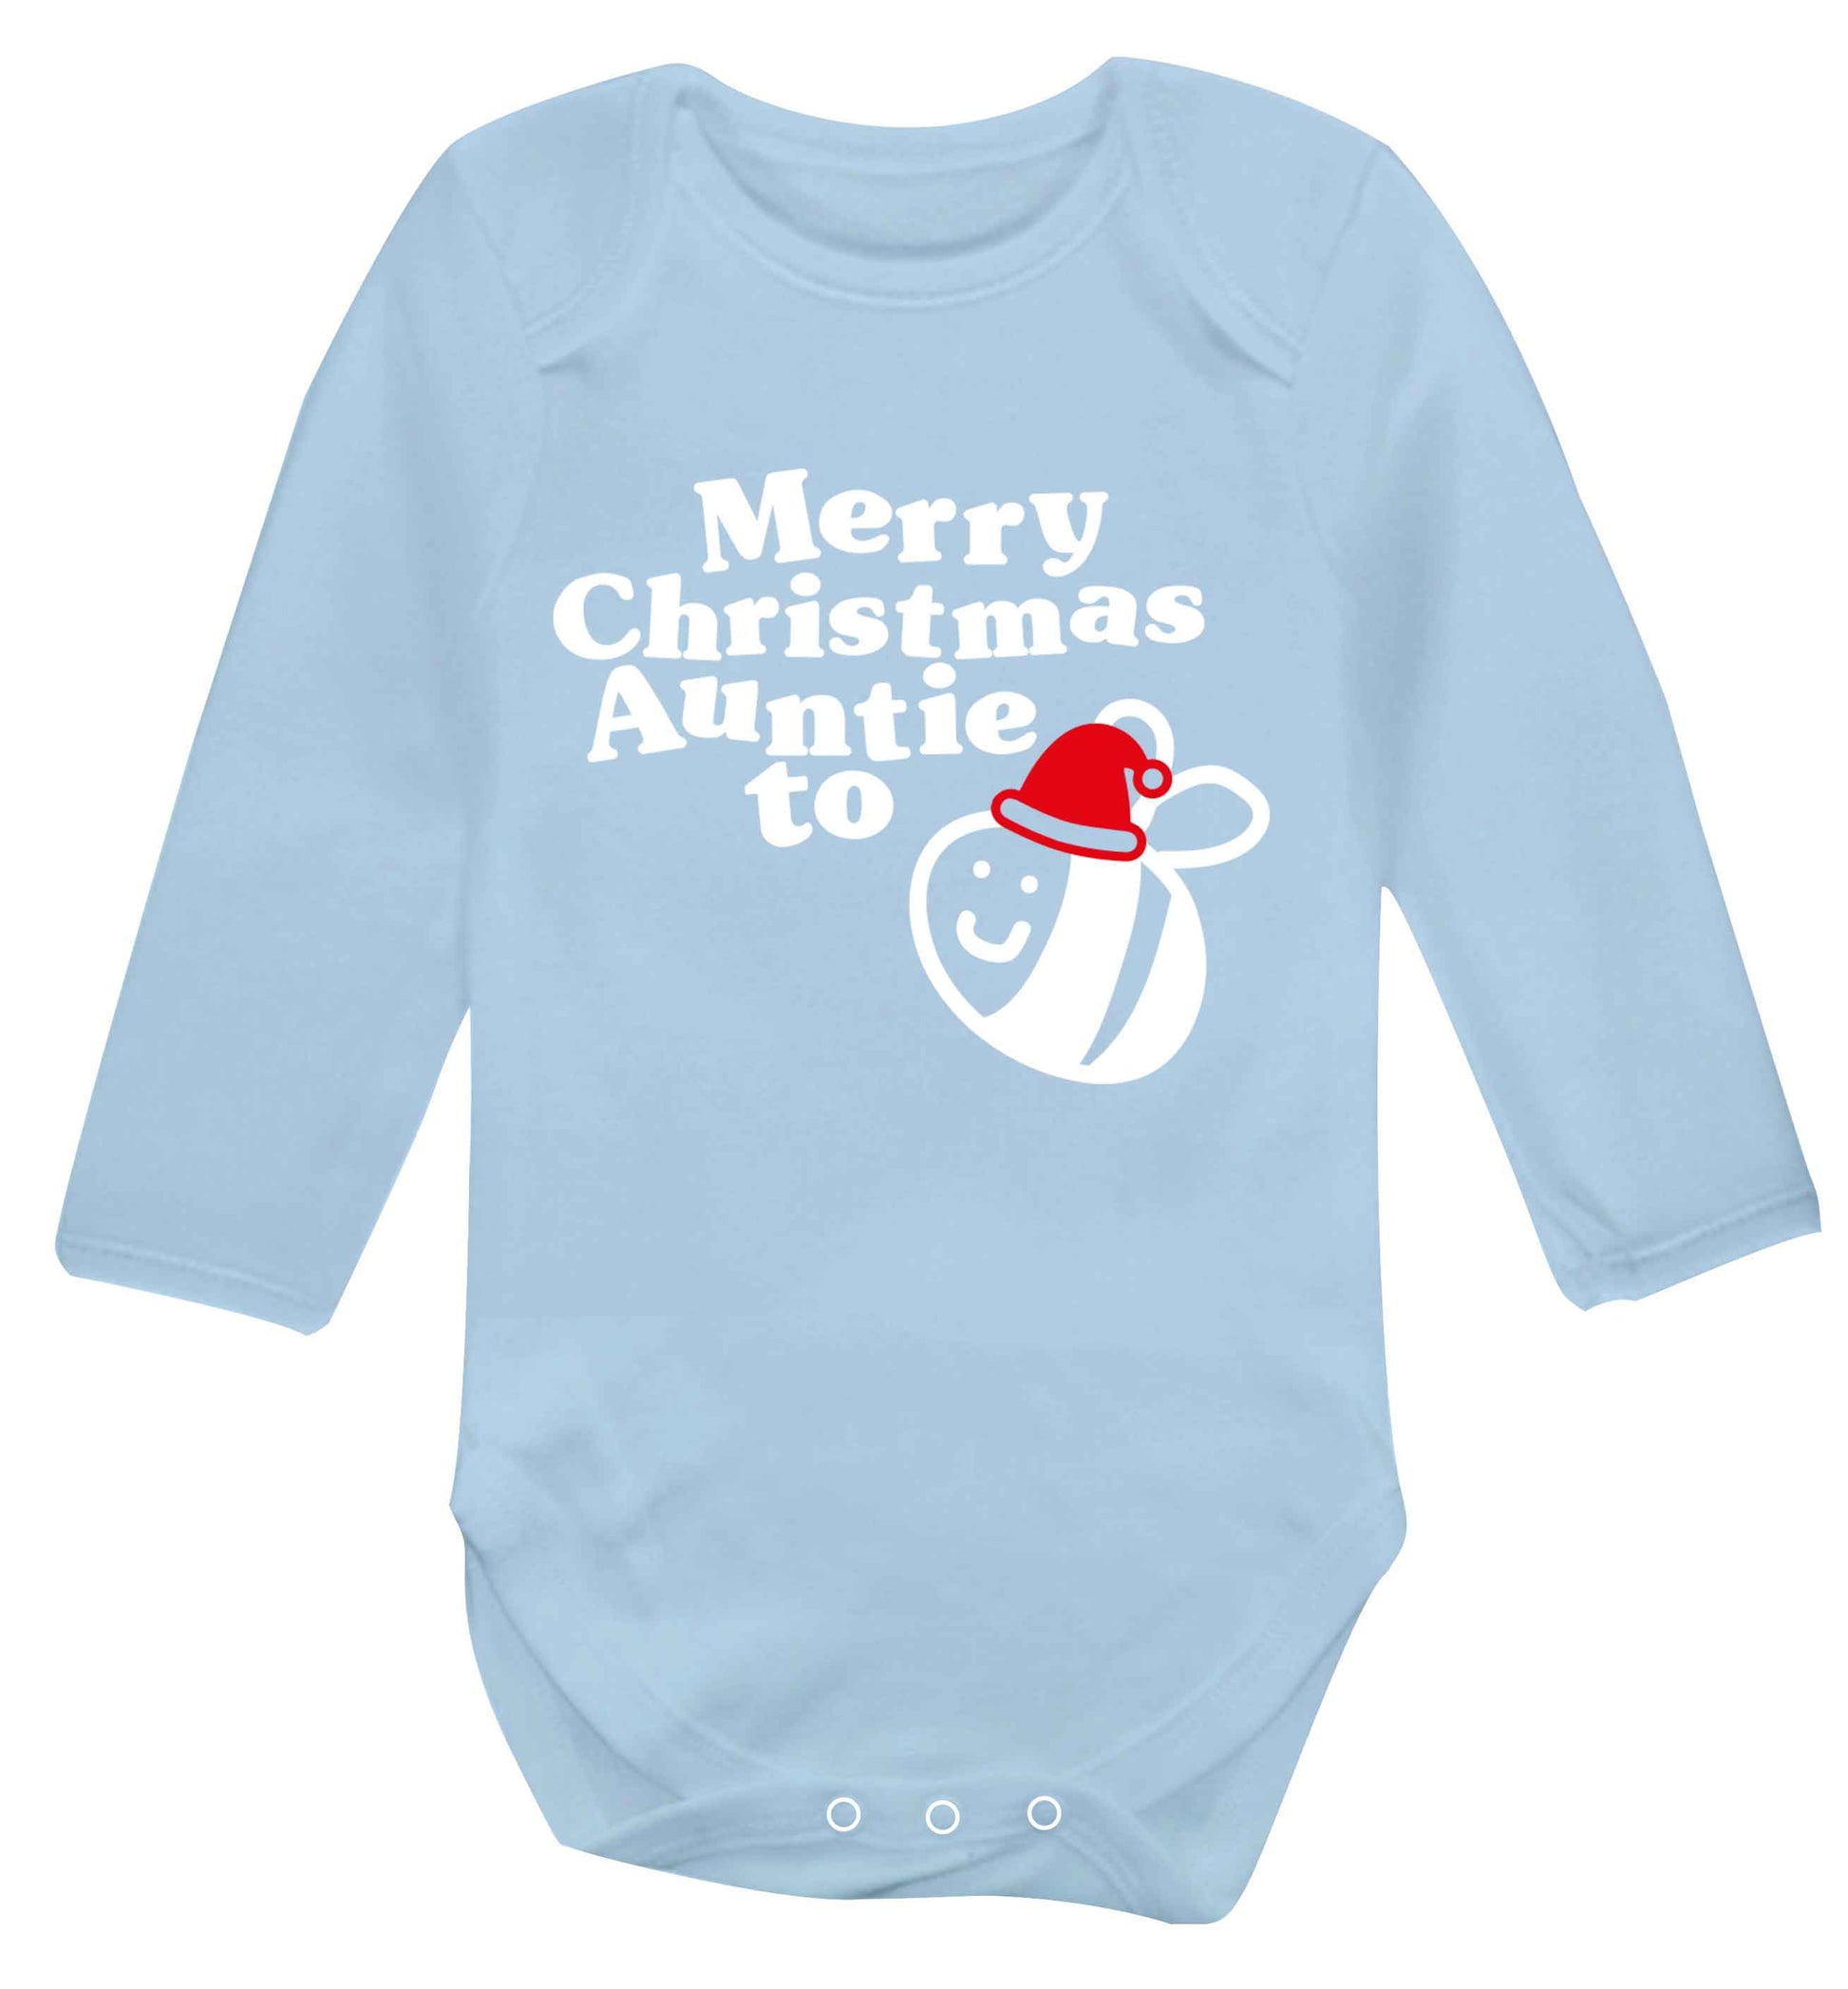 Merry Christmas auntie to be Baby Vest long sleeved pale blue 6-12 months